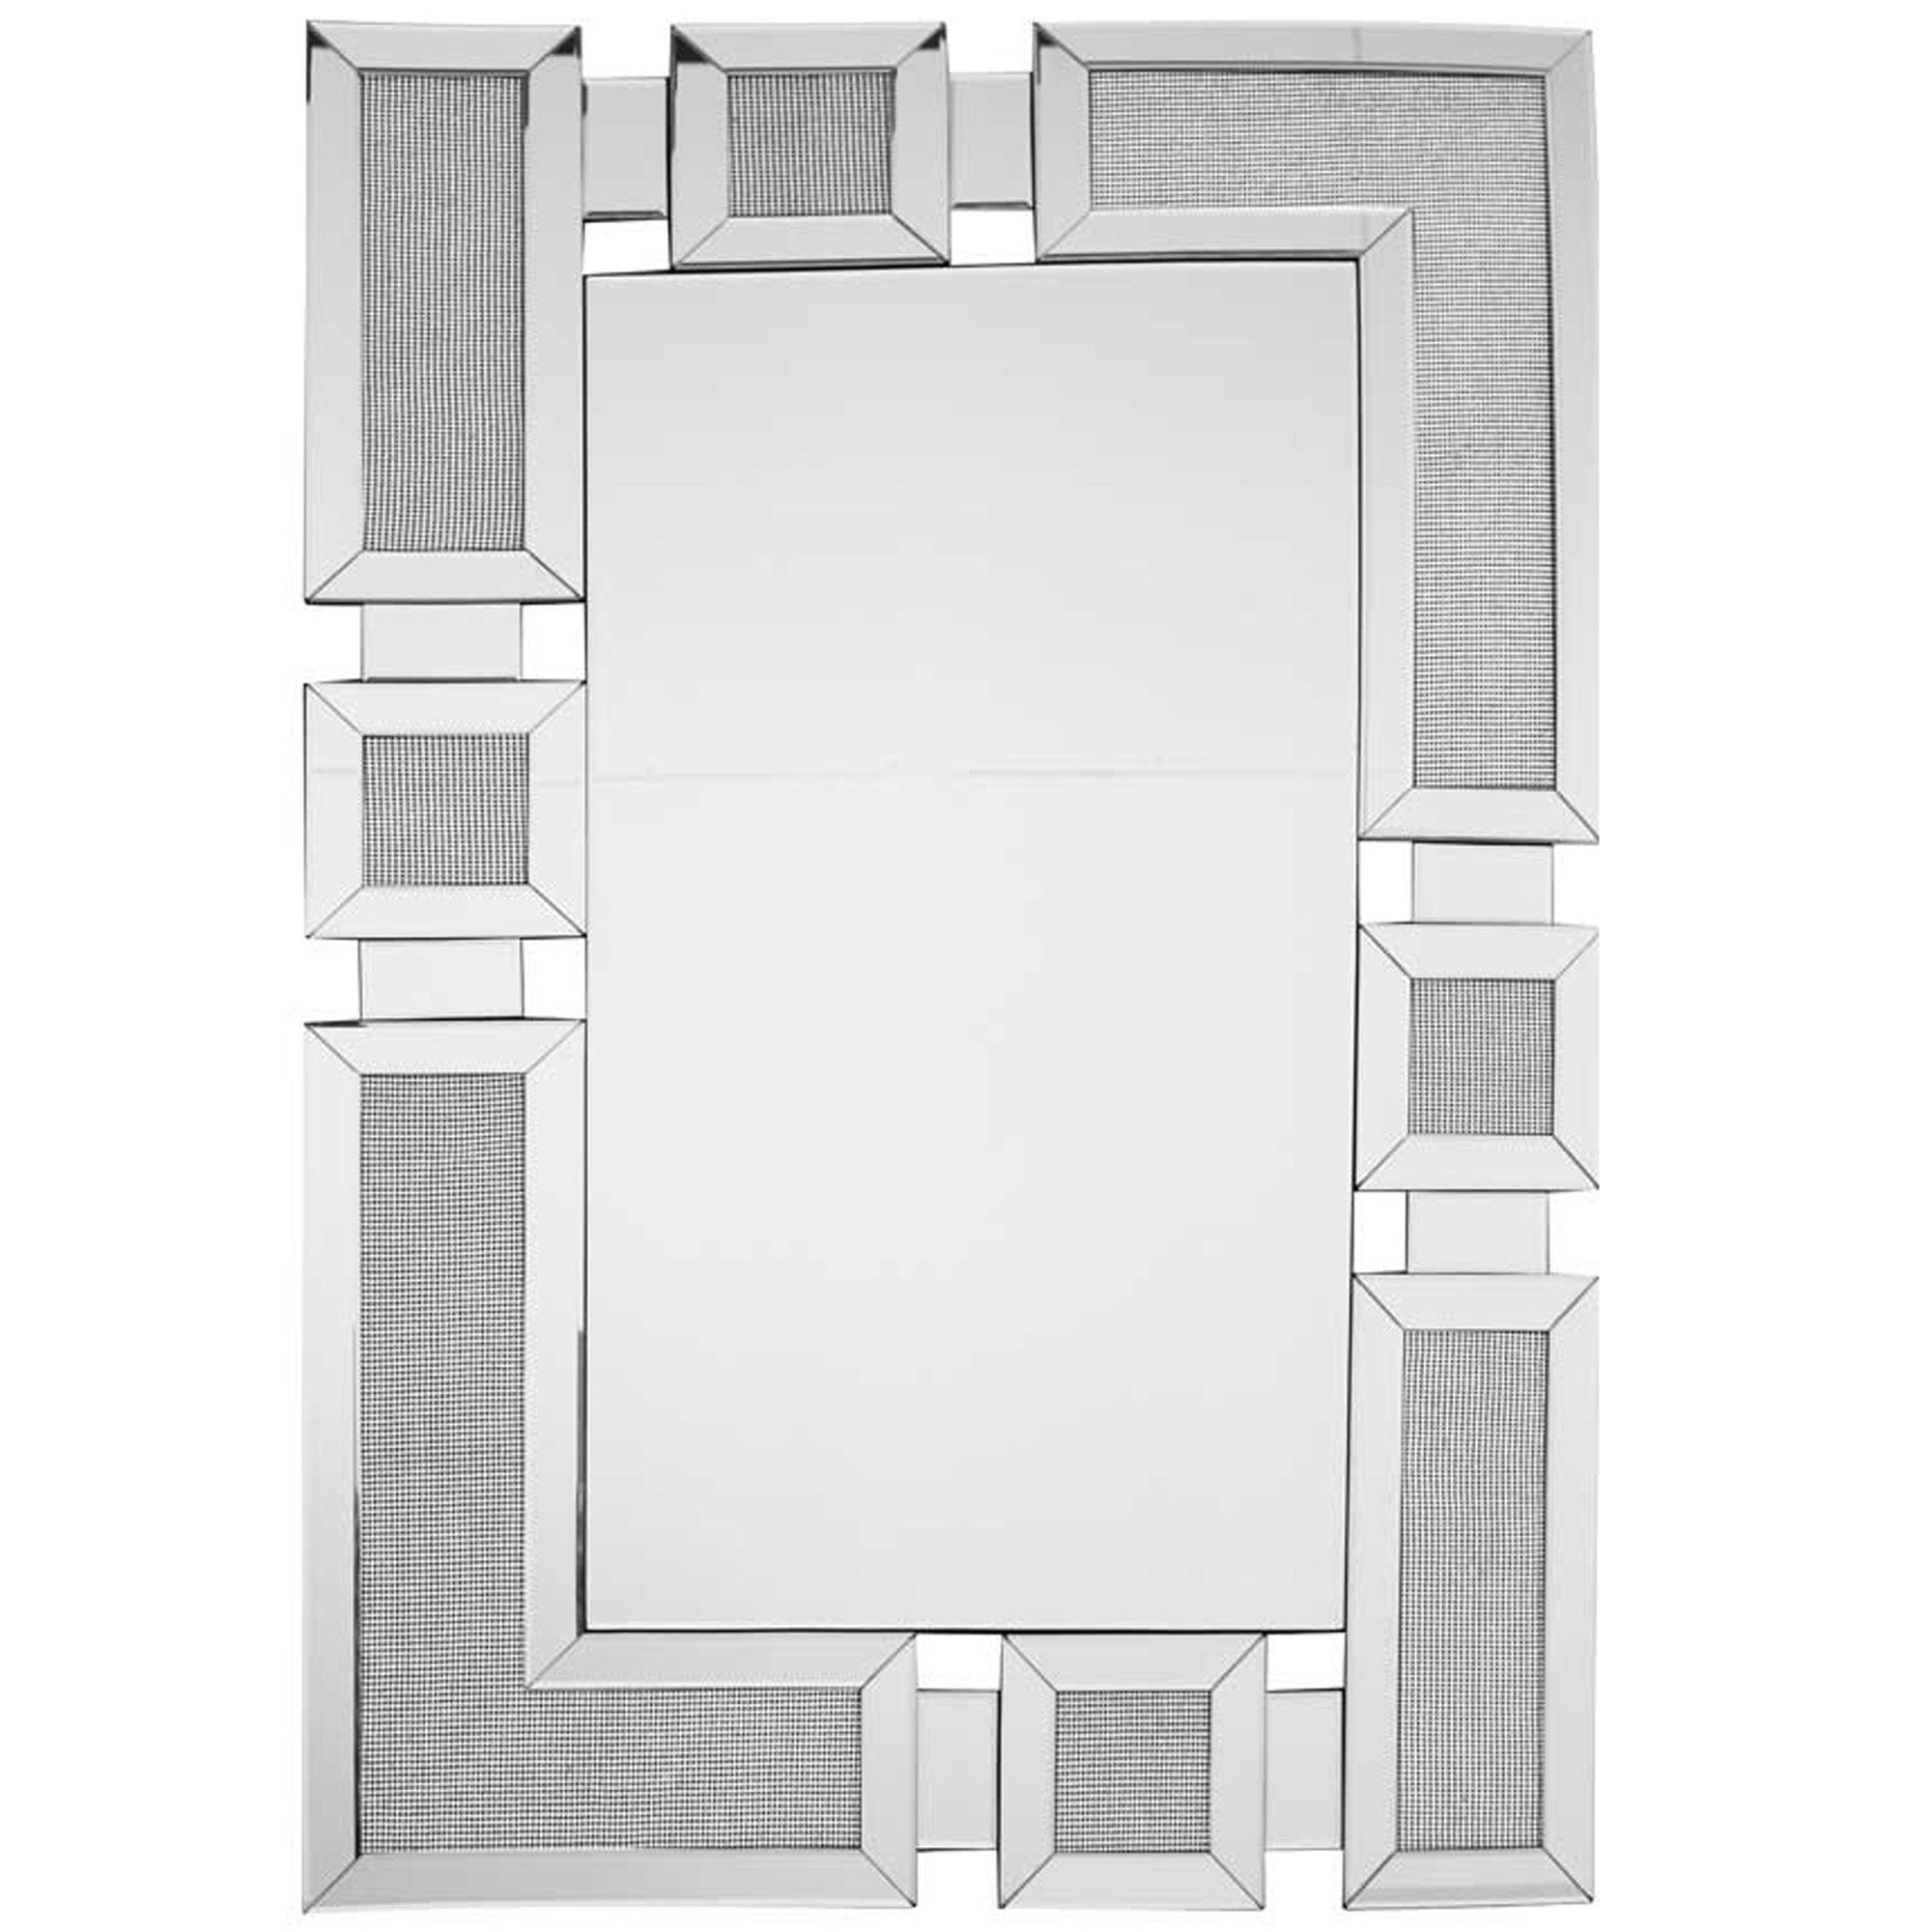 Glamour Decorative Silver Wall Mirror | Decorative Wall Mirrors Pertaining To Silver Decorative Wall Mirrors (View 15 of 15)